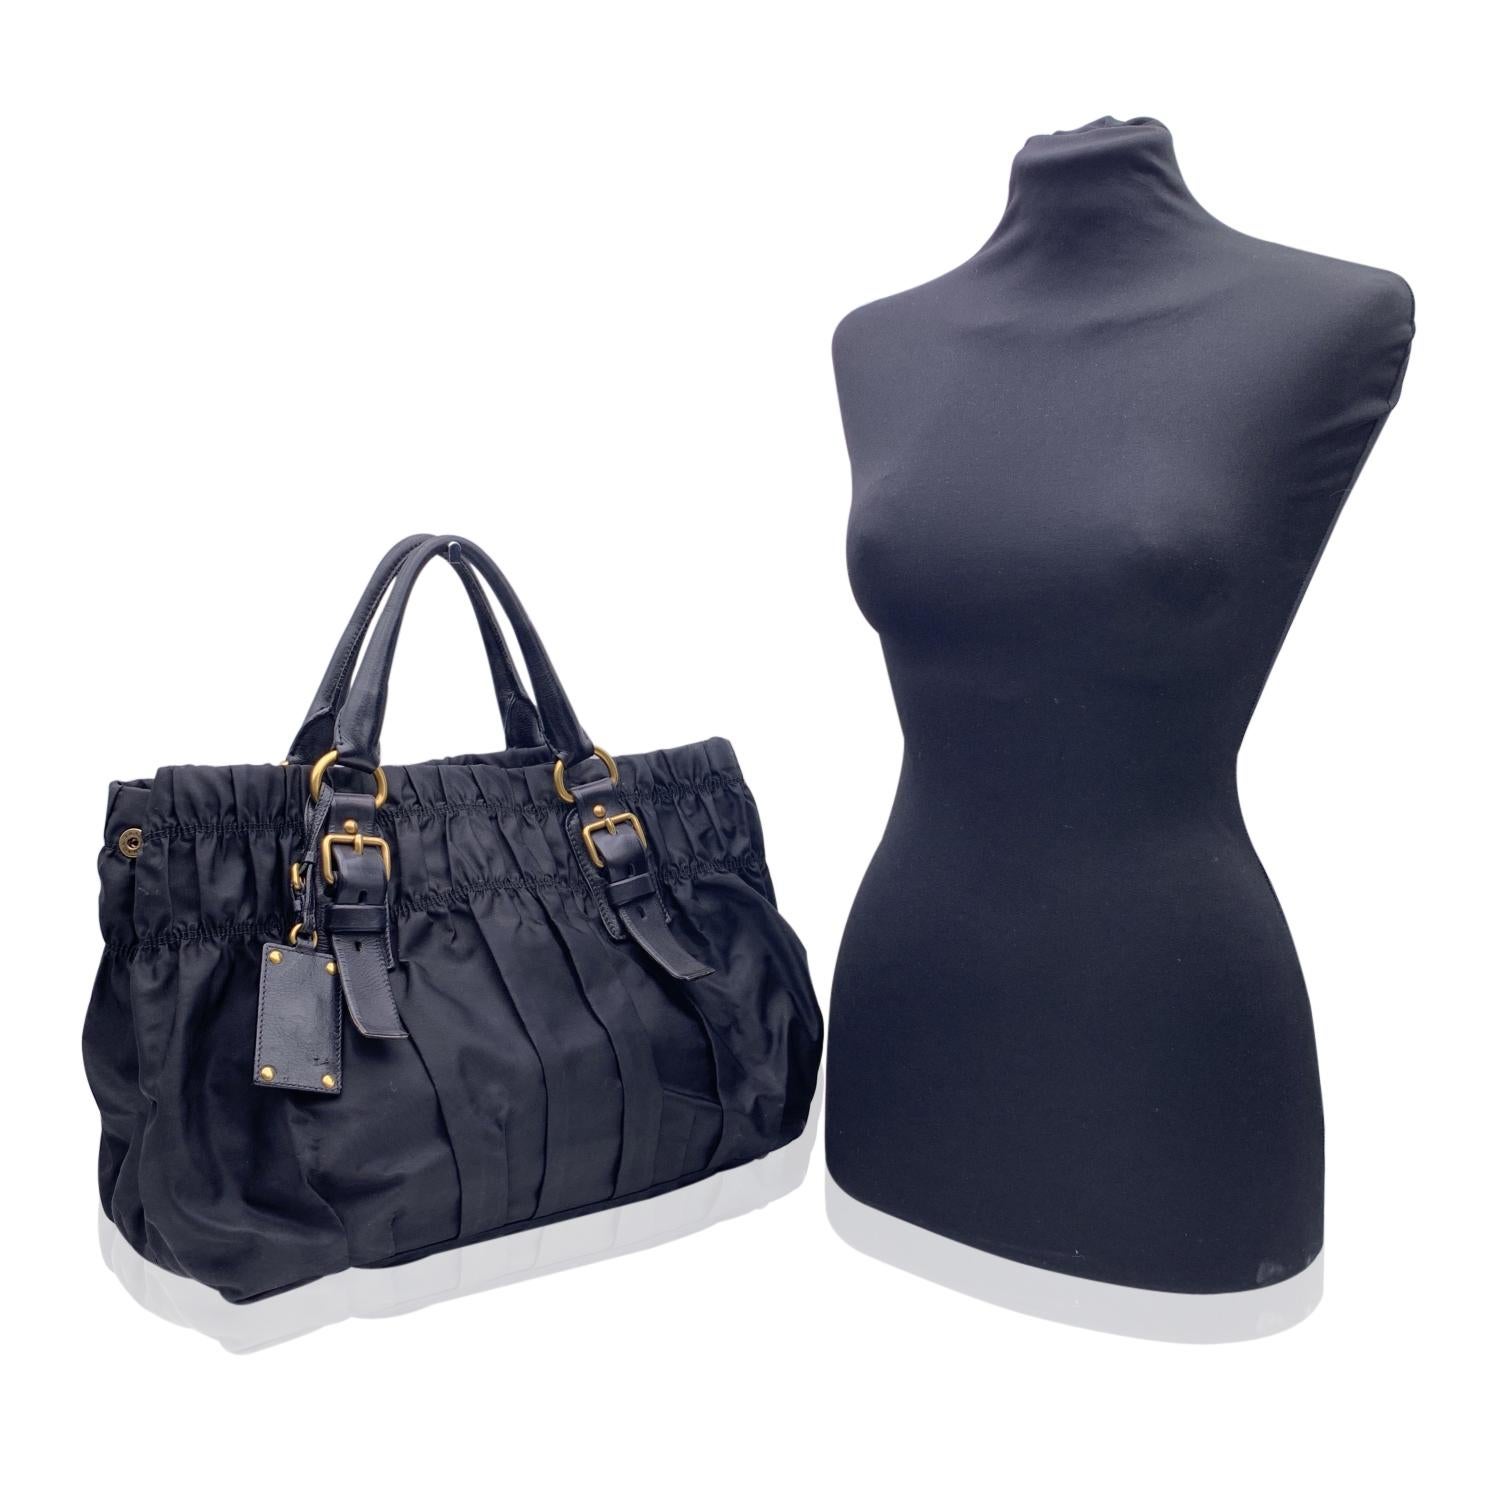 Prada black leather draped tote bag. Black pleated nylon and black leather handles and trim. Gold metal hardware. Button closure on top. Prada signature lining. 2 side zip pockets inside. 'Prada - Milano' tag inside. Small tag with code